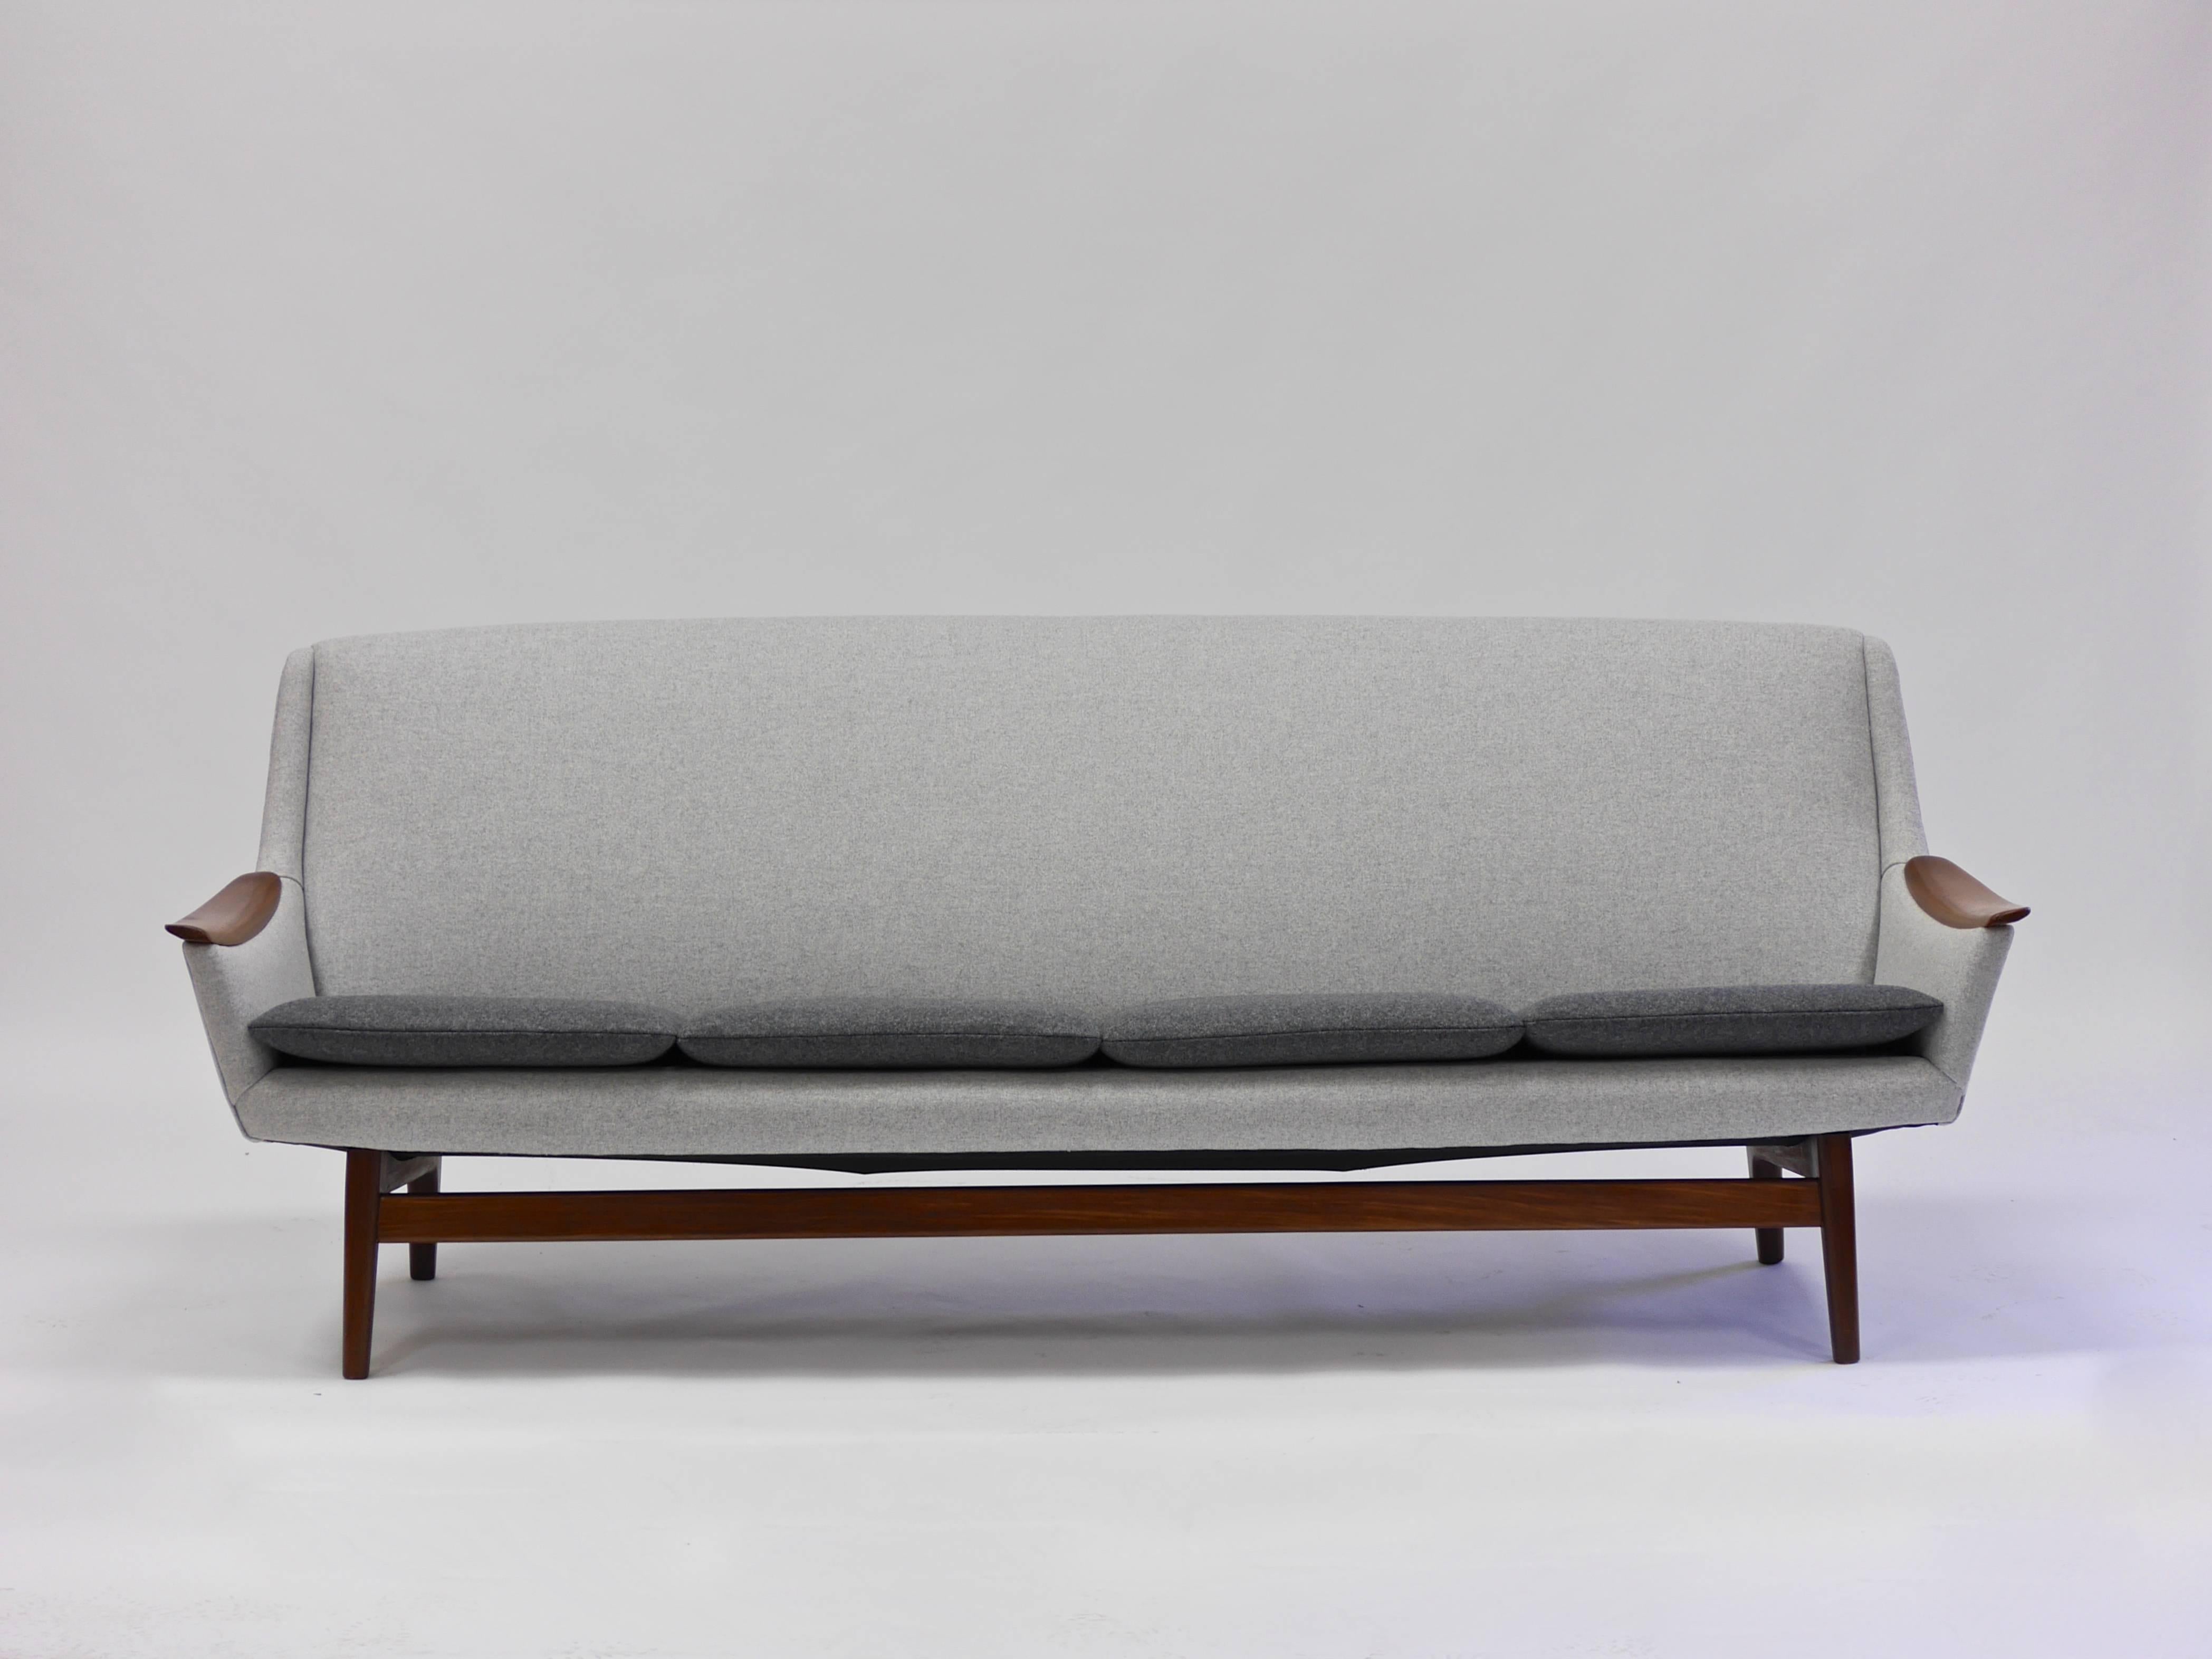 An exceptional example of modern Scandinavian design with its expressive form and fine detailing. Designed in Norway by Rastad & Relling in the 1960s. Masterfully reupholstered in two-tone Kvadrat Divina Melange. Beautiful to look at, well made and